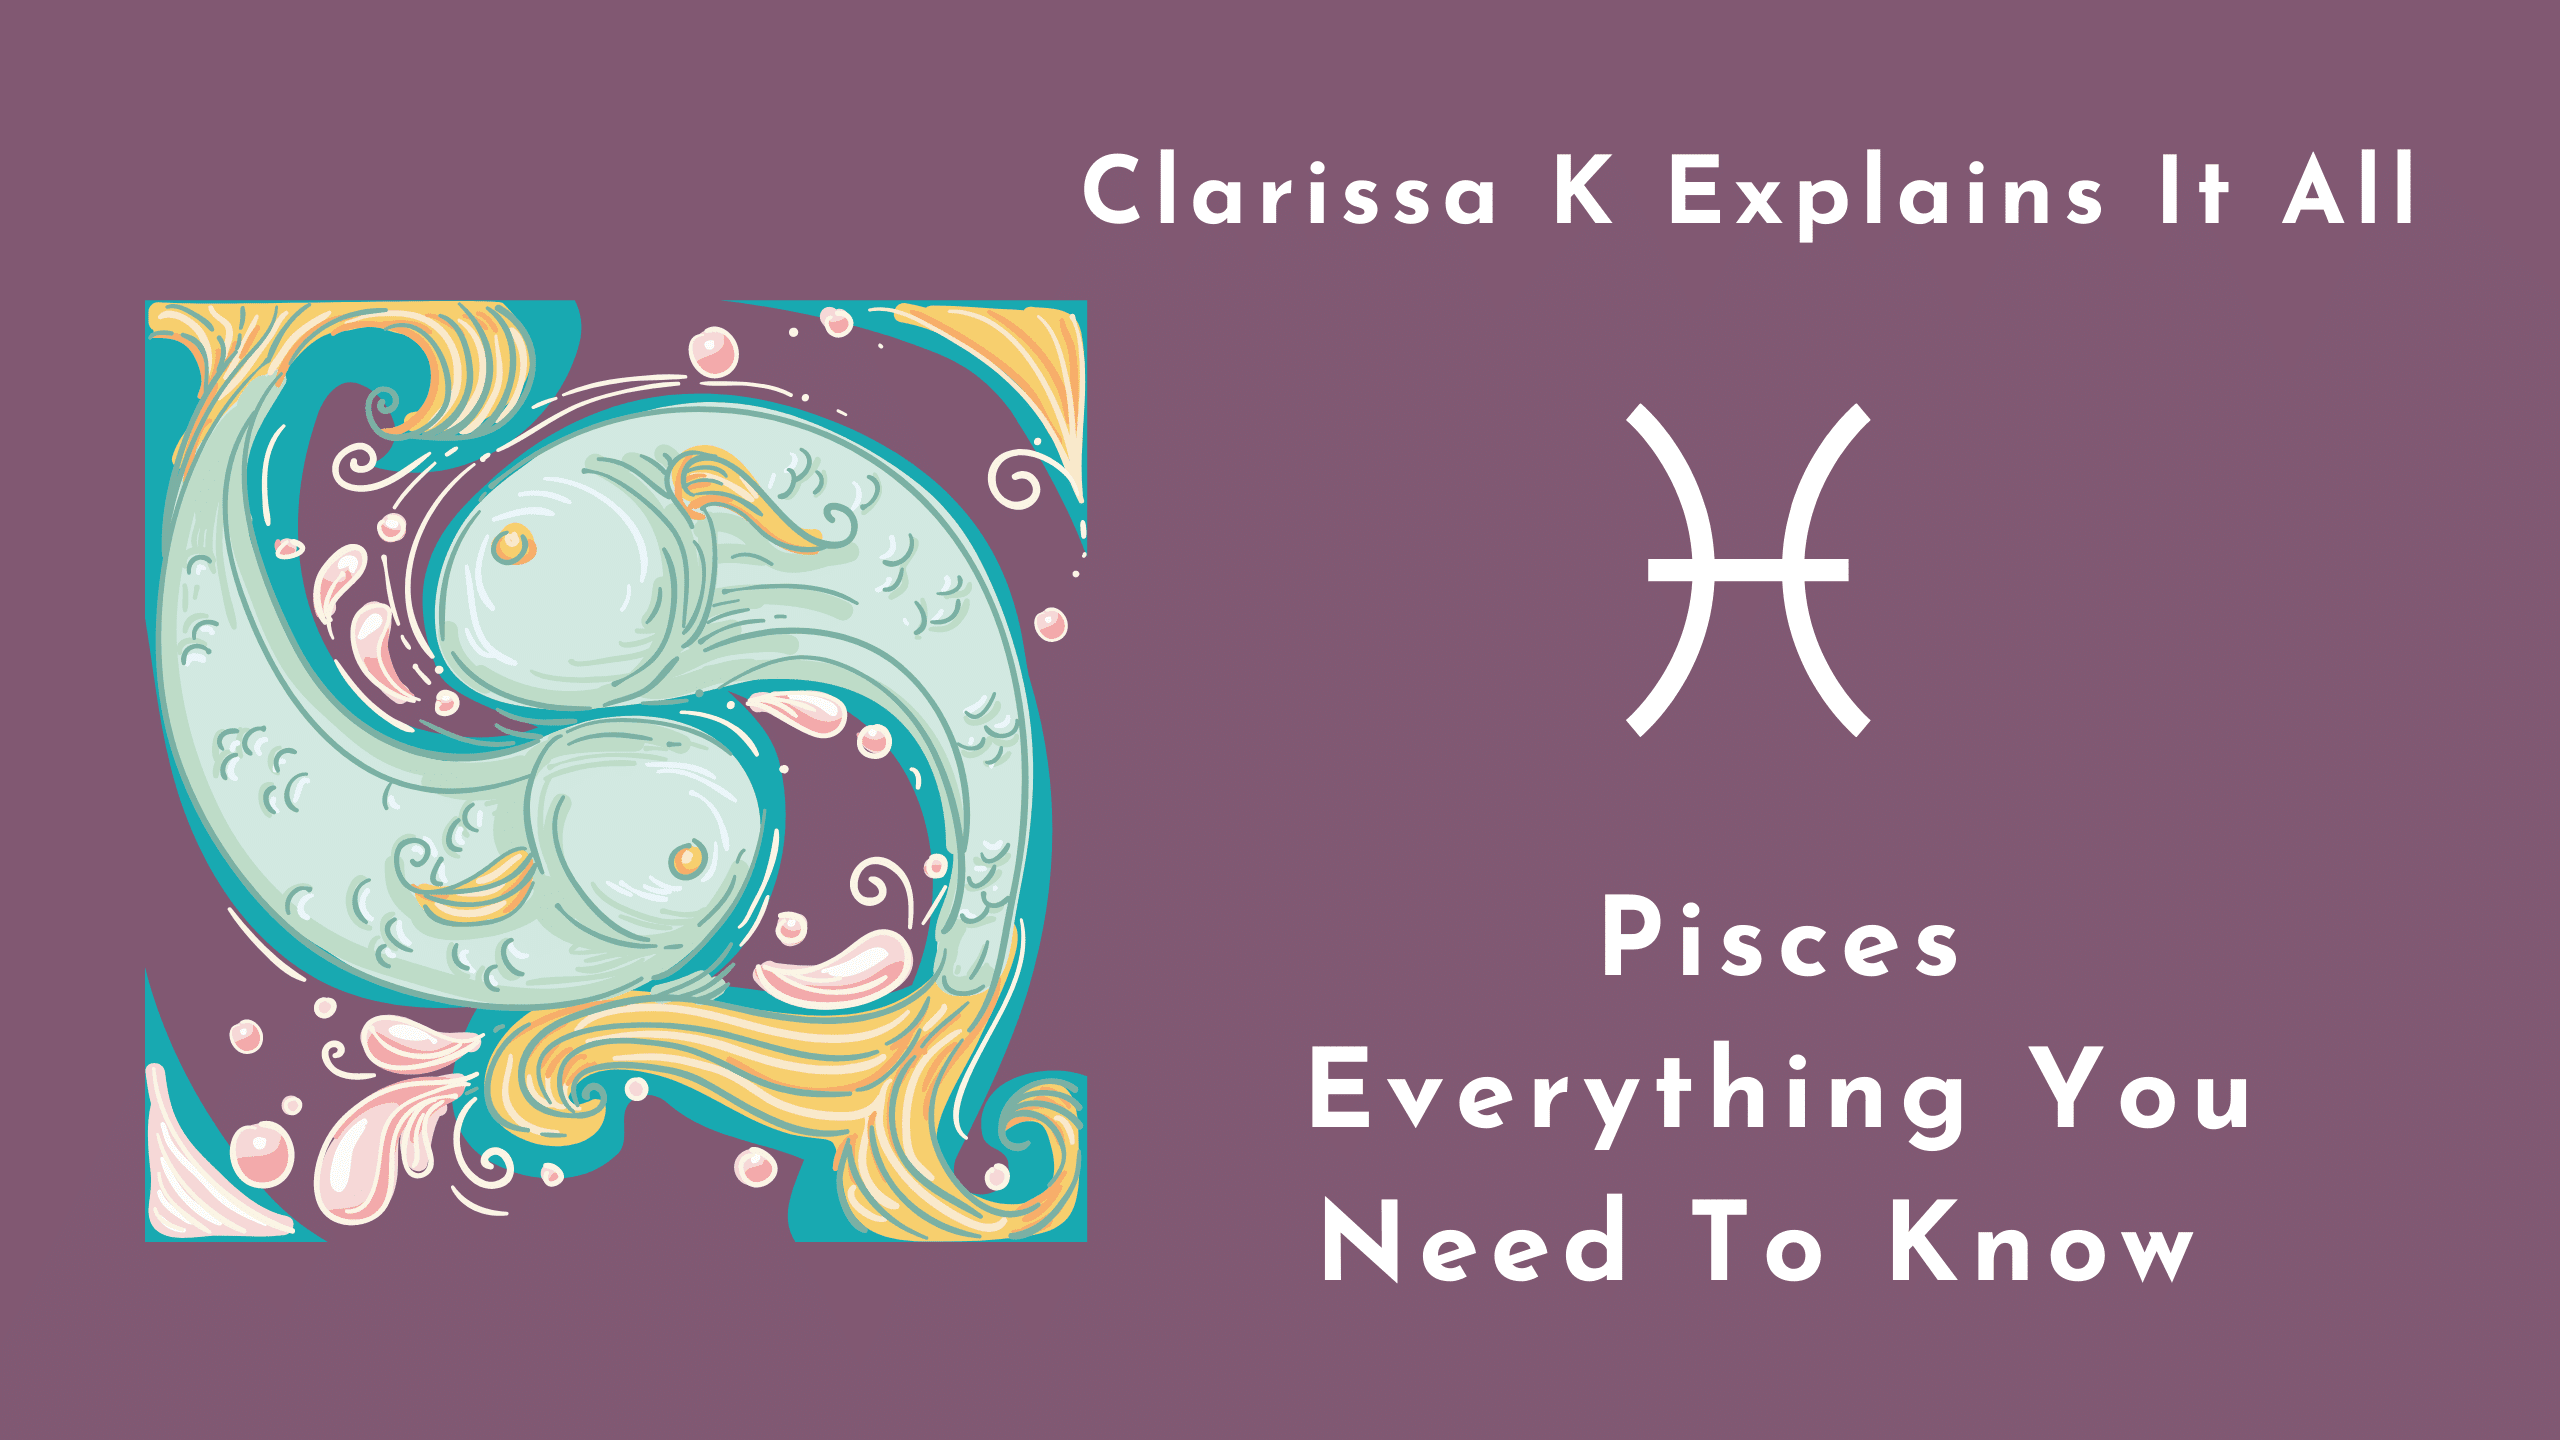 What to know about pisces